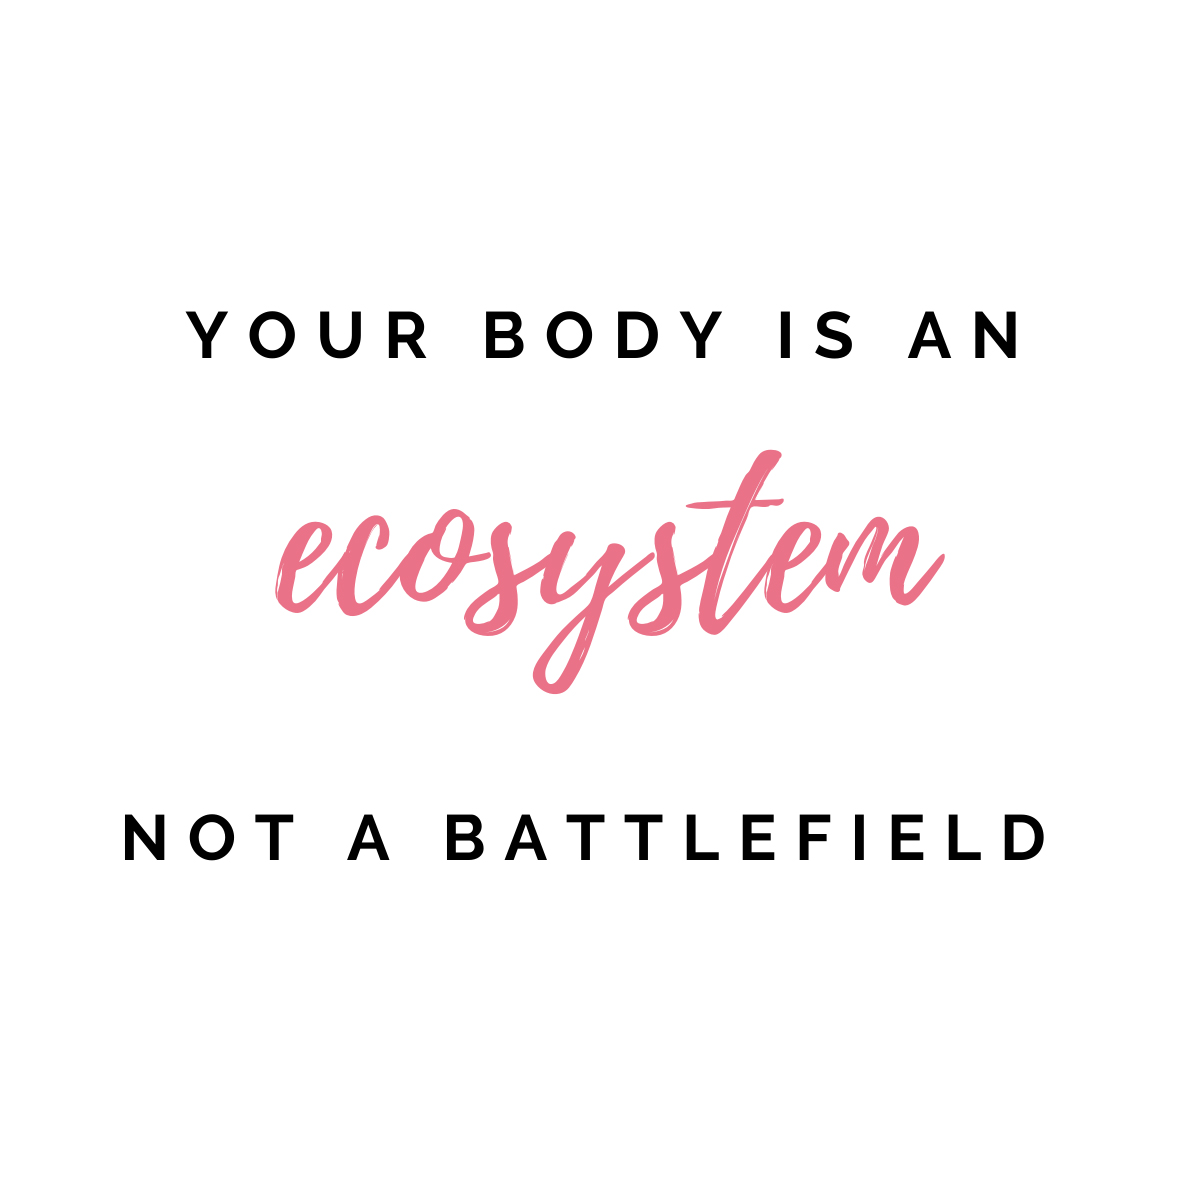 Your Body is an Ecosystem not a Battlefield